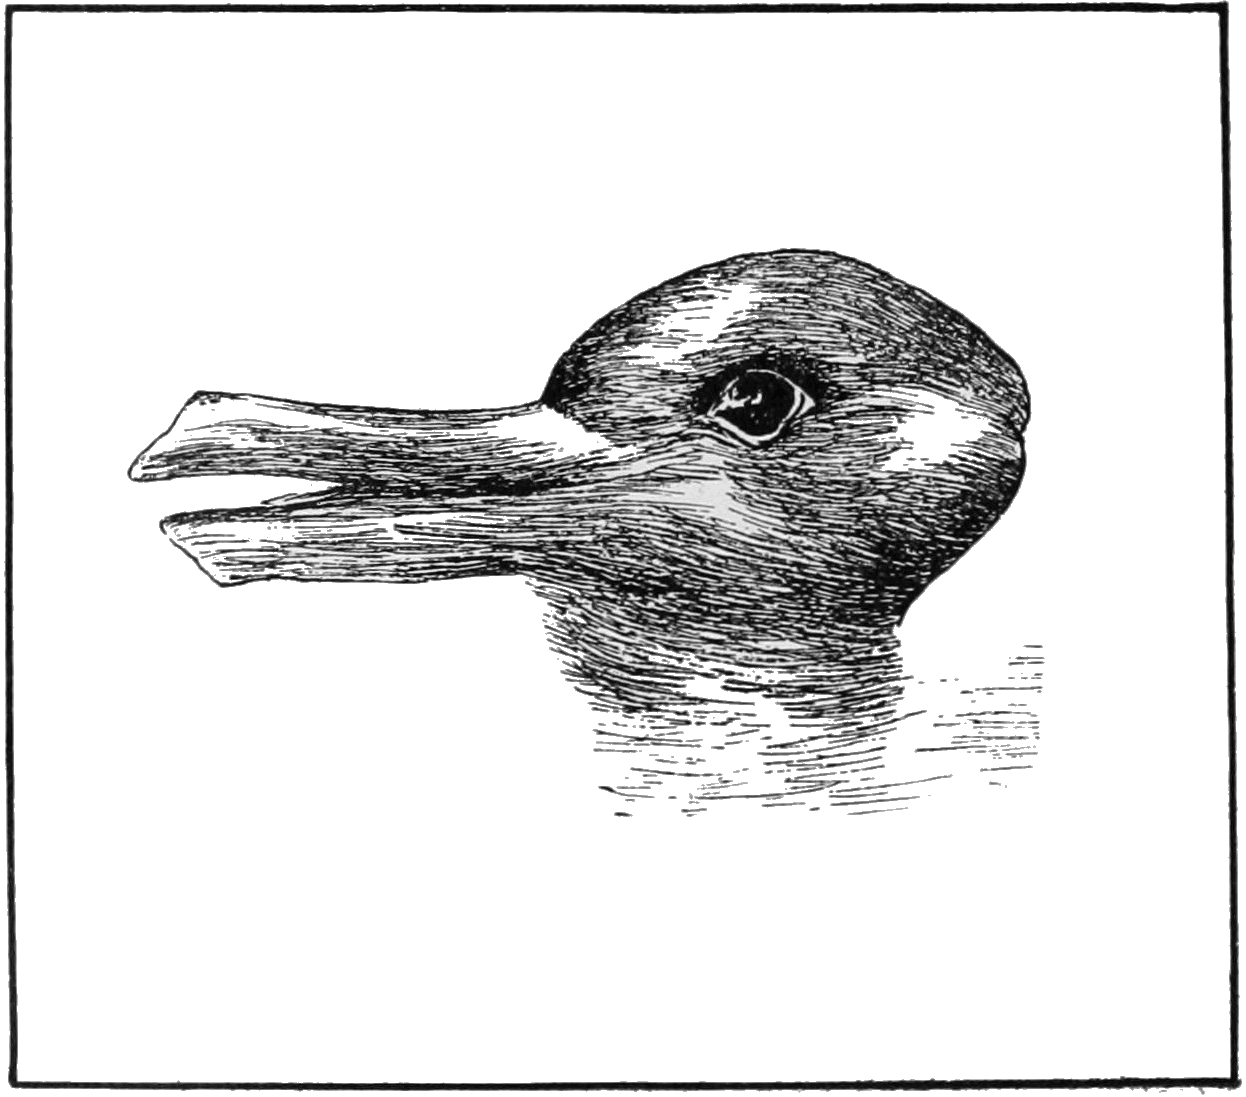 A sketch showing an optical illusion of a duck or a rabbi head. Looking left to right, one might see a duck head with an open beak, looking right to left, one might see a rabbit head and see the beak as rabbits ears. 